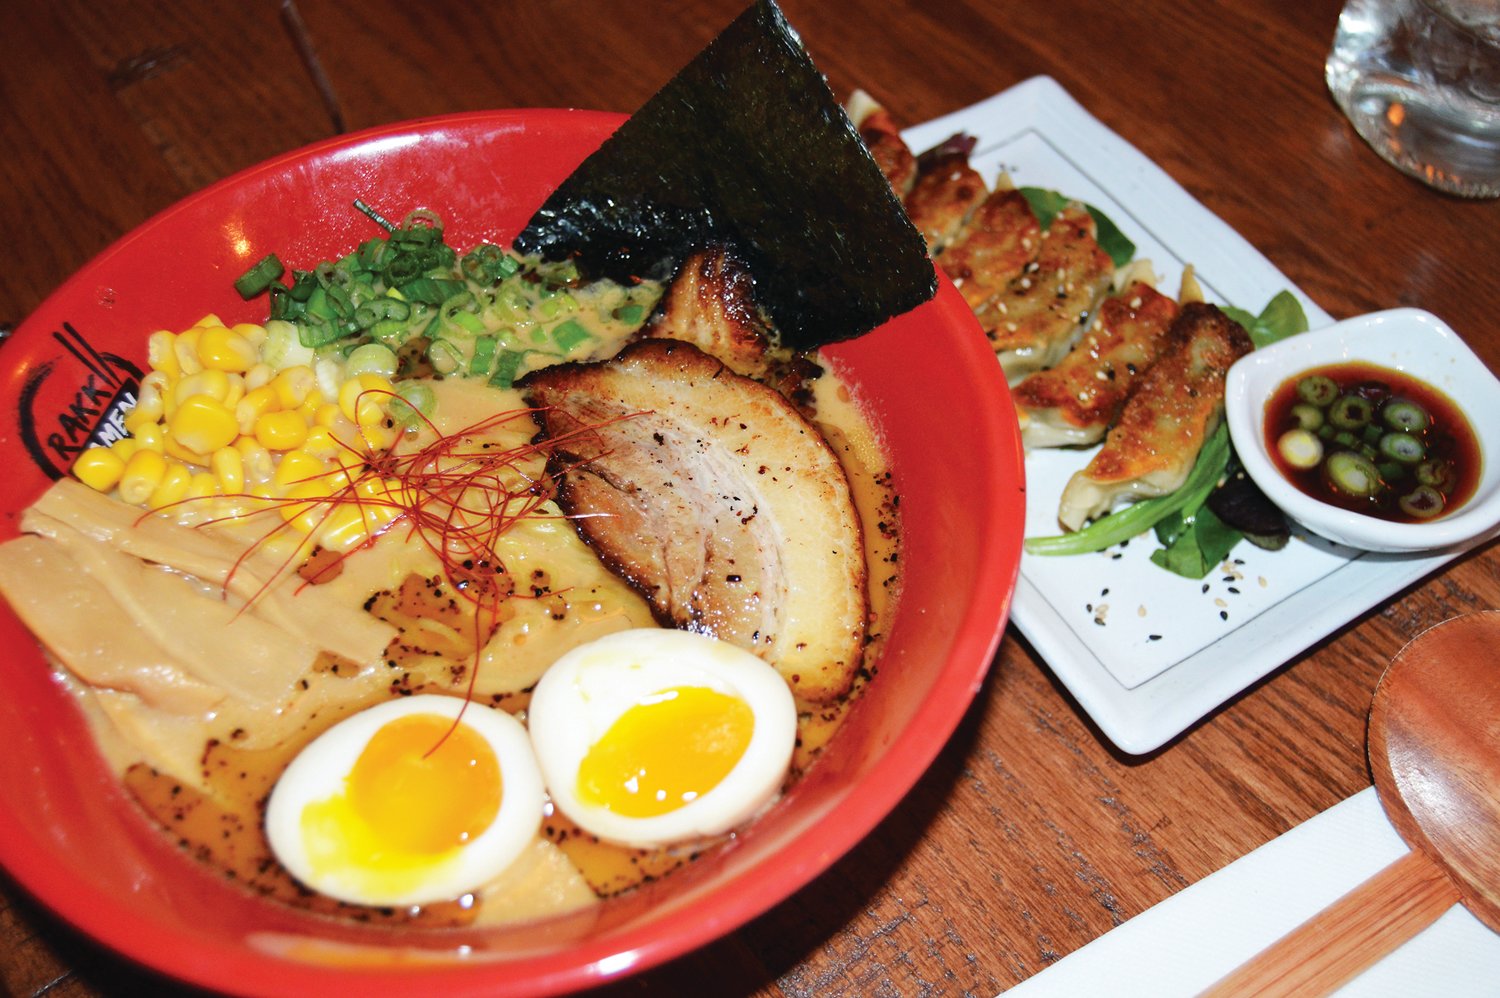 Miso ramen, with pork broth, corn, seaweed, soft-boiled eggs, scallions, bamboo shoots and traditional noodles, is a customer favorite at Rakkii Ramen. Photograph by Susan S. Yeske.